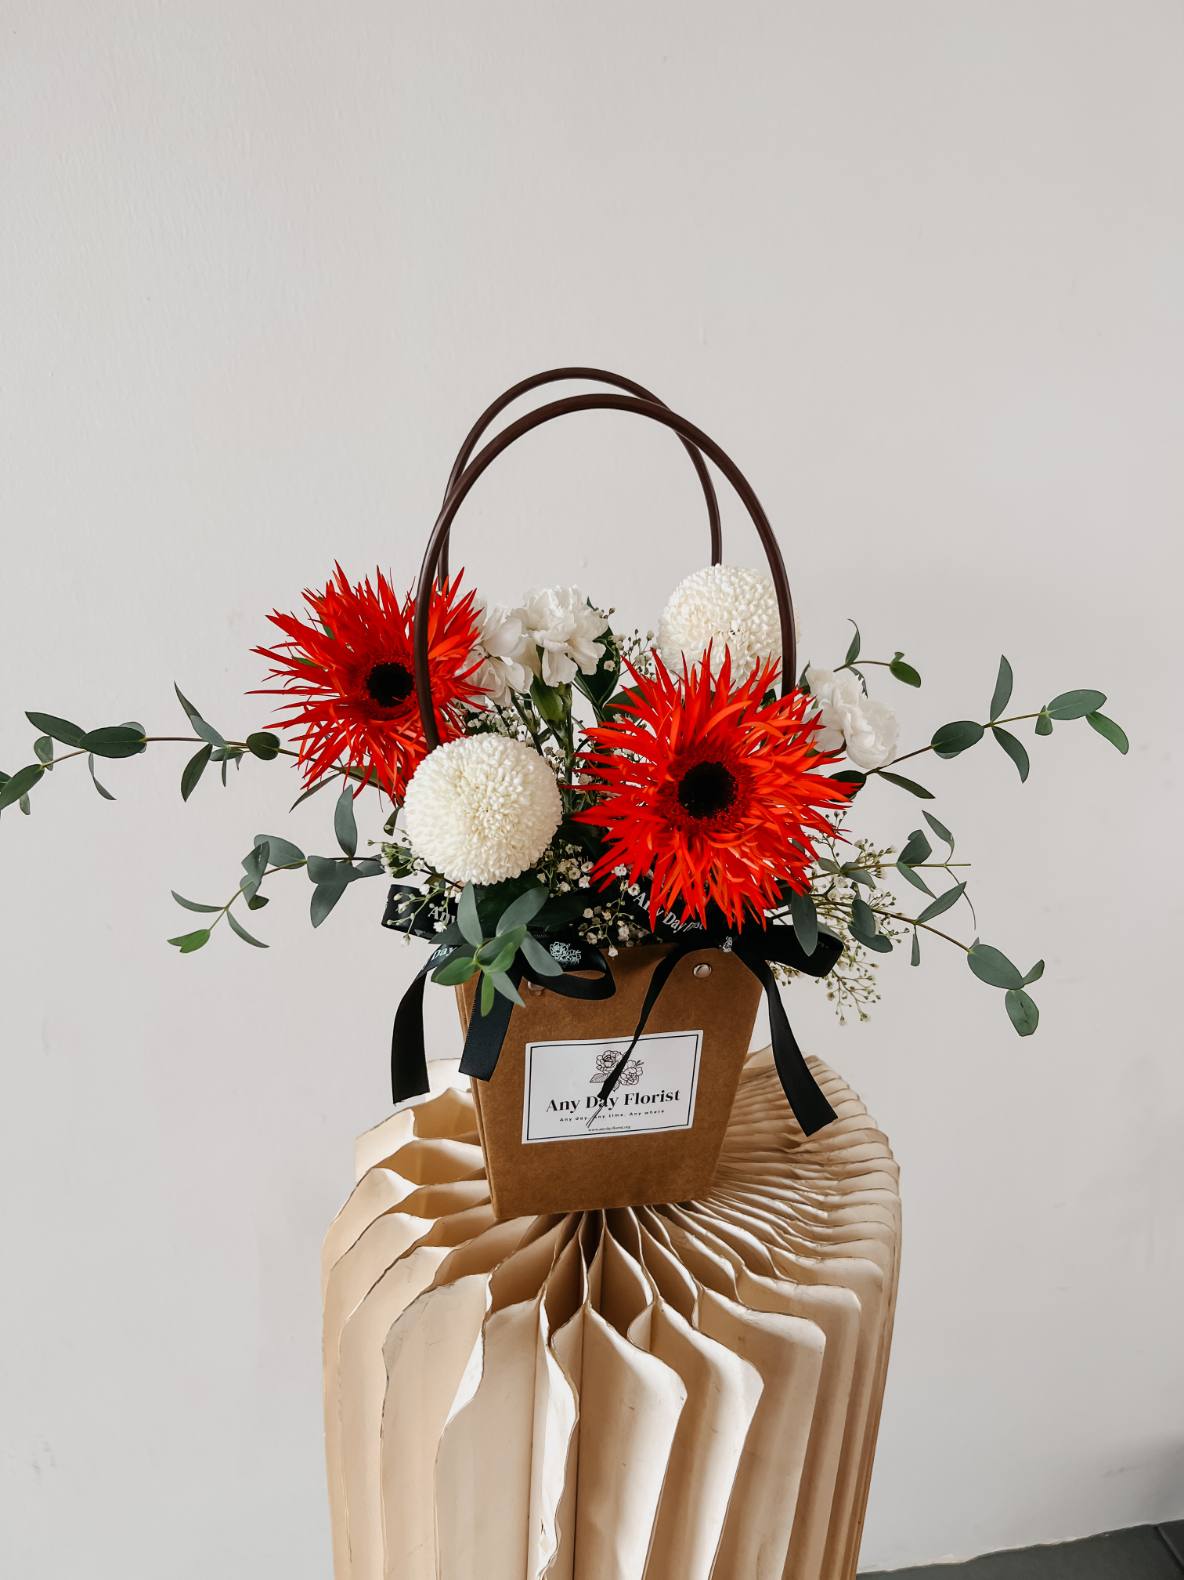 Any Day FloristPerfect Ocassion for: Birthday, Monthsary, I'm Sorry
*Do note that fresh flowers, fillers &amp; foliage are seasonal and are subjected to changes based on availabiliClarissa | Bloom Bag Arrangement